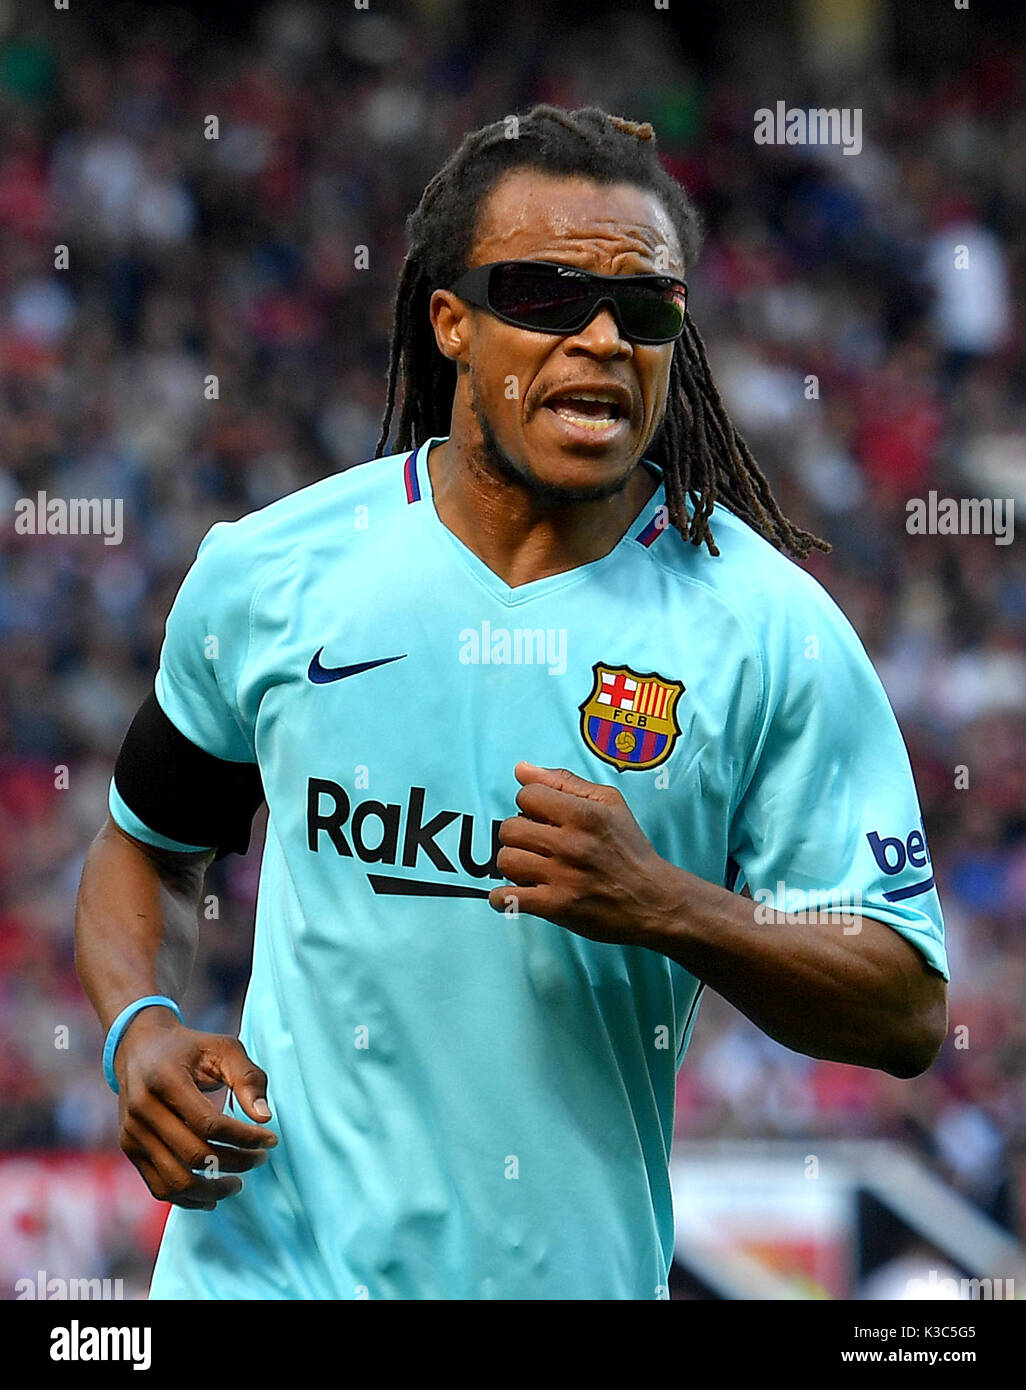 Barcelona's Edgar Davids during the legends match at Old Trafford, Manchester. Stock Photo